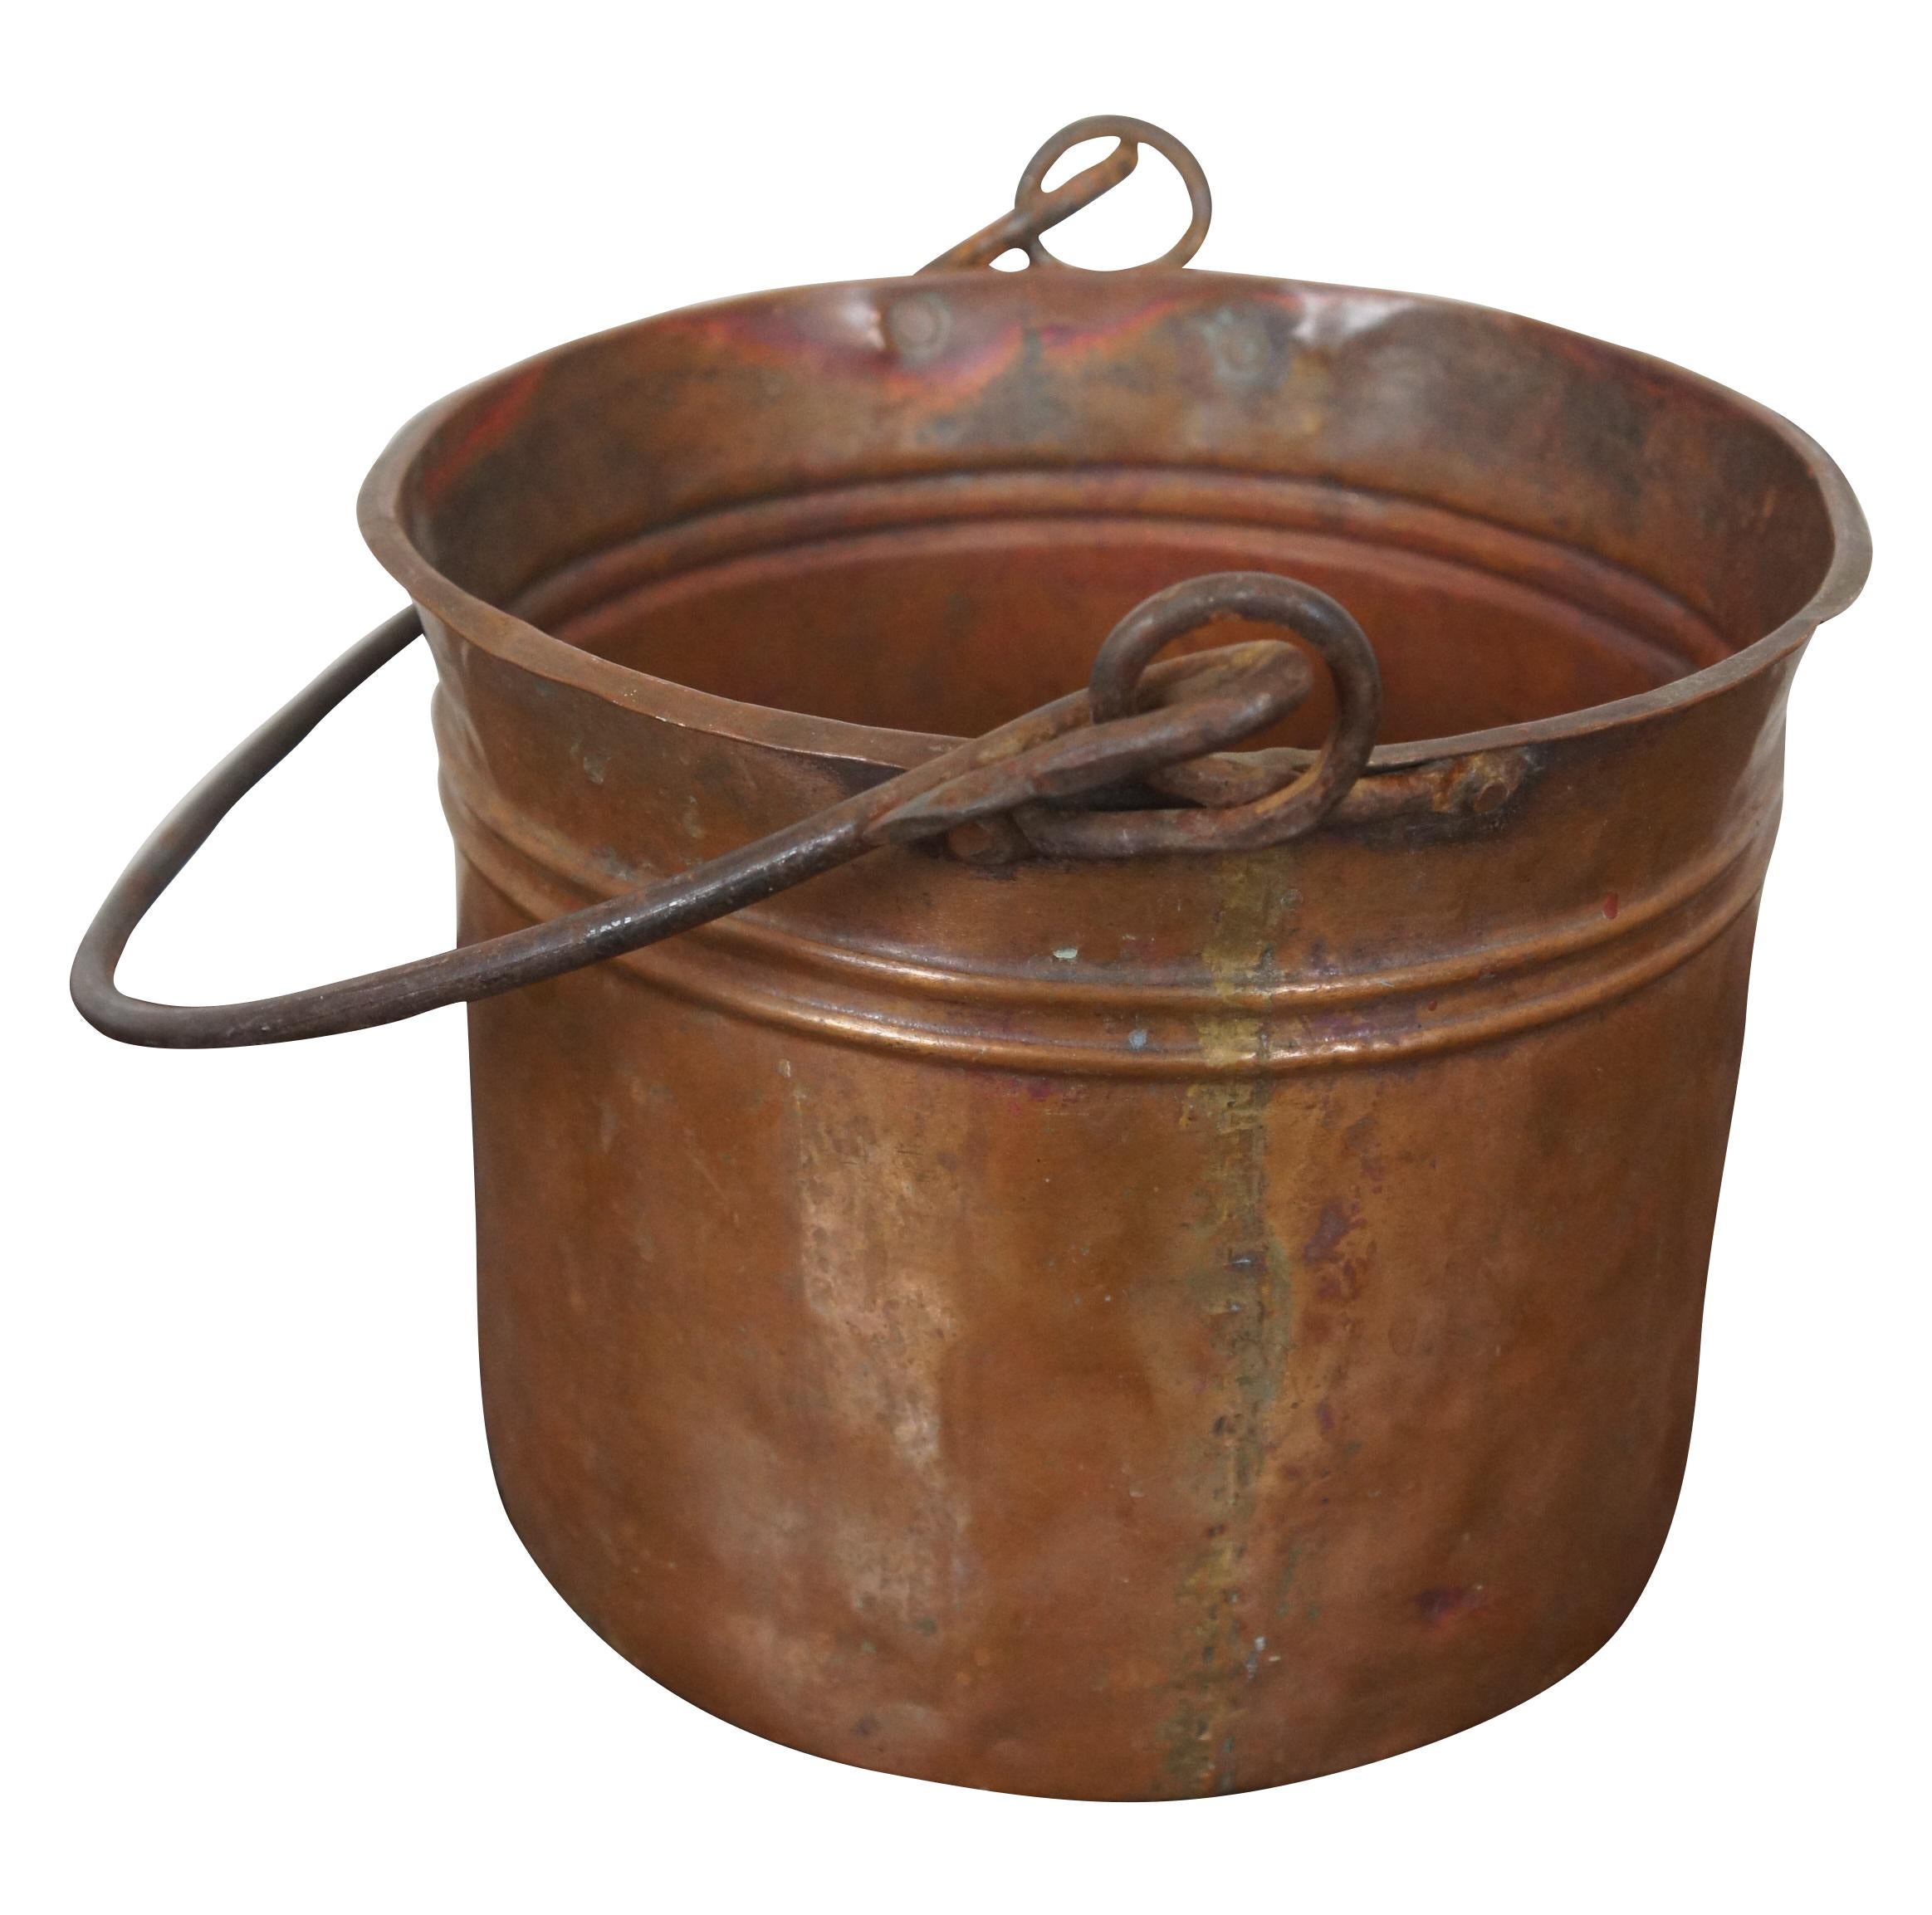 Antique 18th century copper bucket / pail / cauldron featuring dovetailing, banding and forged iron handle. Measure: 12